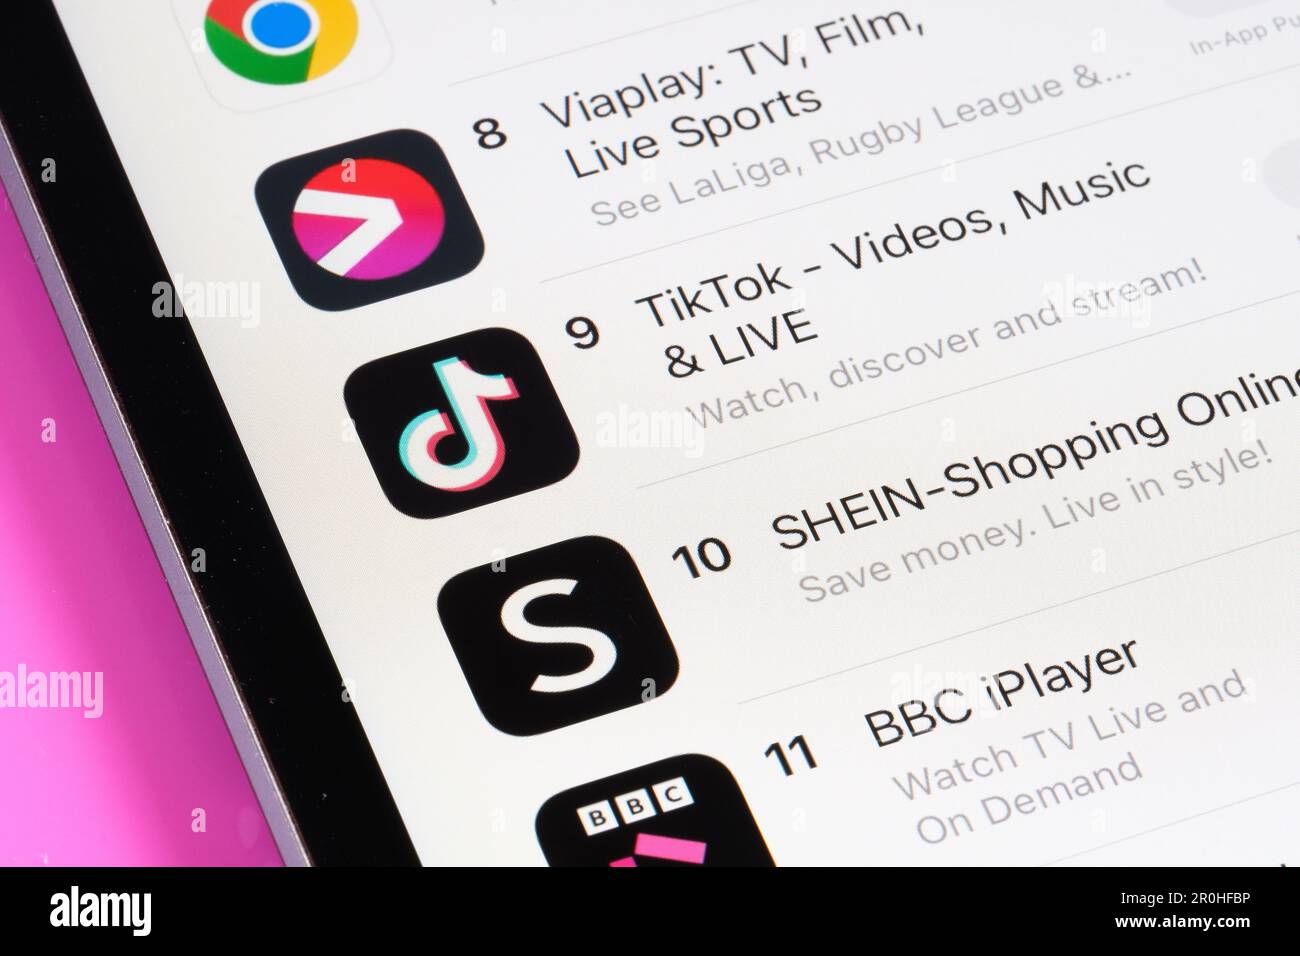 Viaplay, TikTok, Shein BBC iplayer apps seen in App Store on the screen of ipad. Selective focus. Stafford, United Kingdom, May 6, 2023 Stock Photo